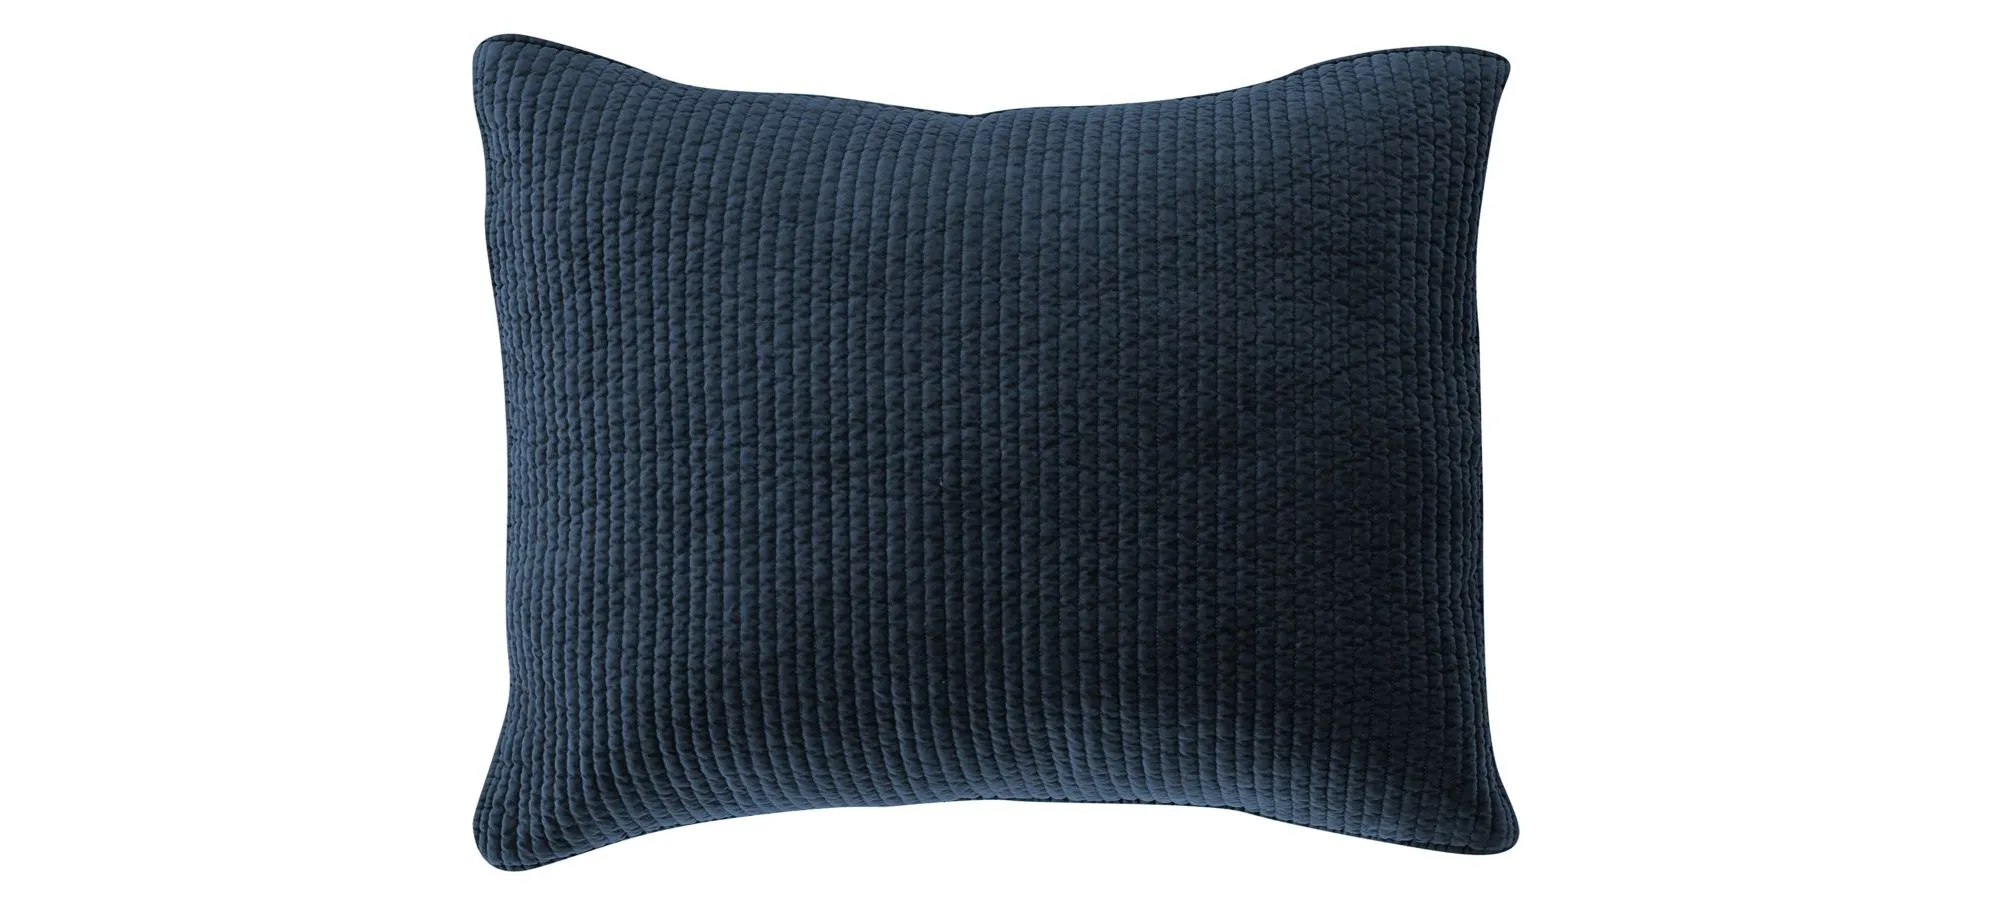 Stonewashed Cotton Velvet Quilted Pillow Sham in Navy by HiEnd Accents